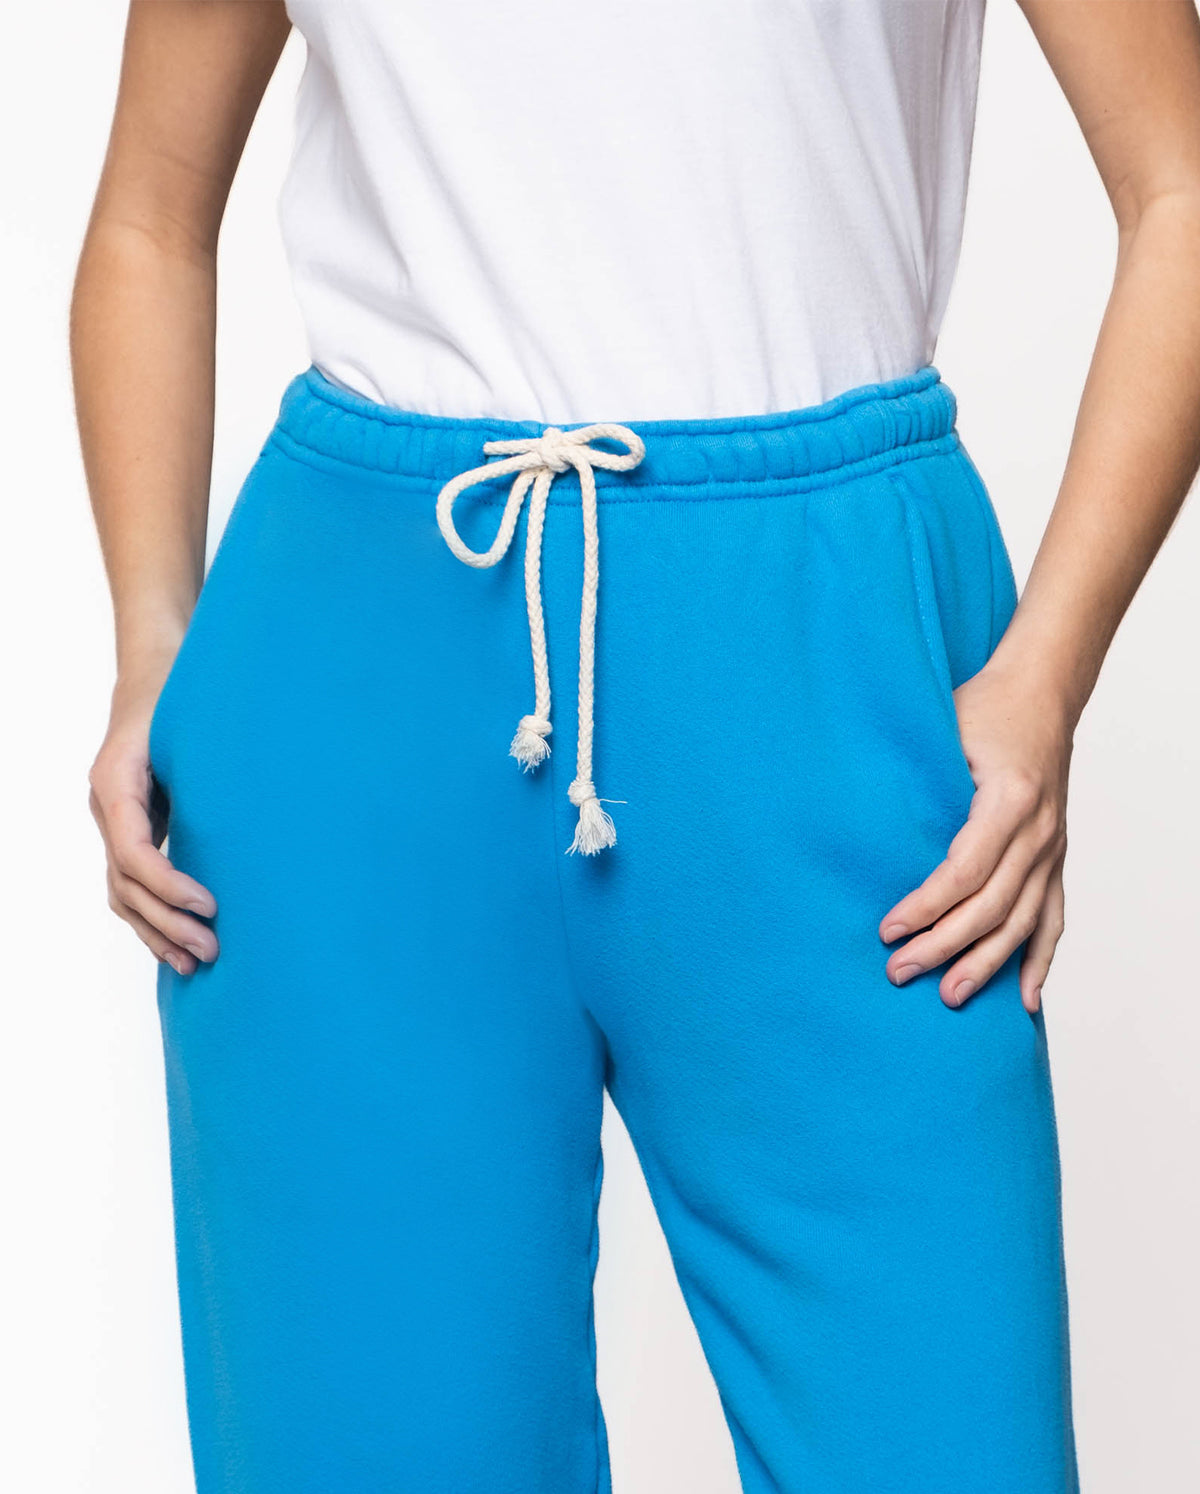 Jogger In Turquoise